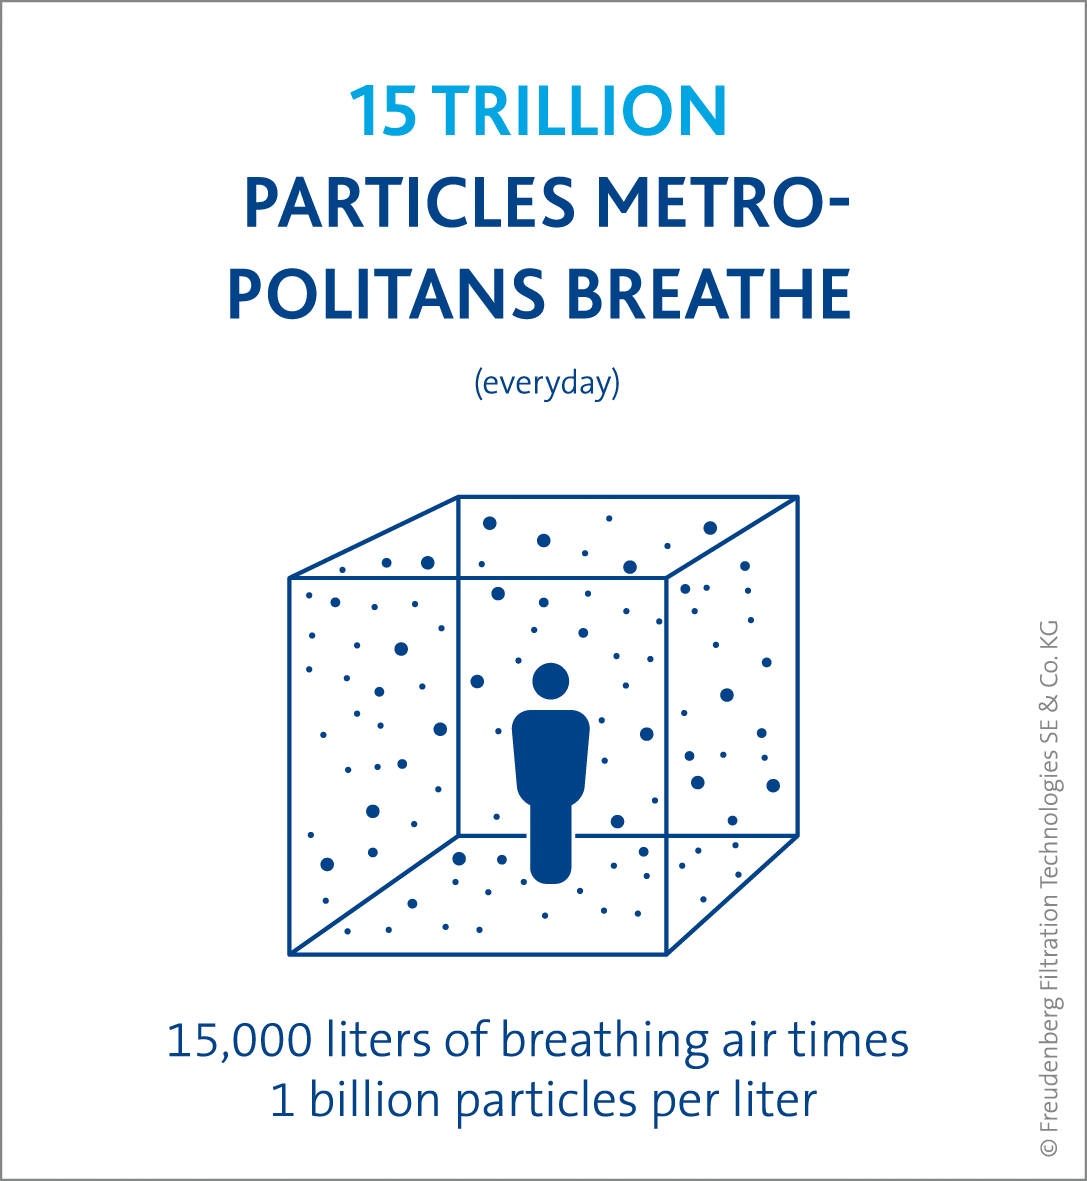 Diagram: Those living in metropolitan areas breathe 15 TRILLION particles every day.